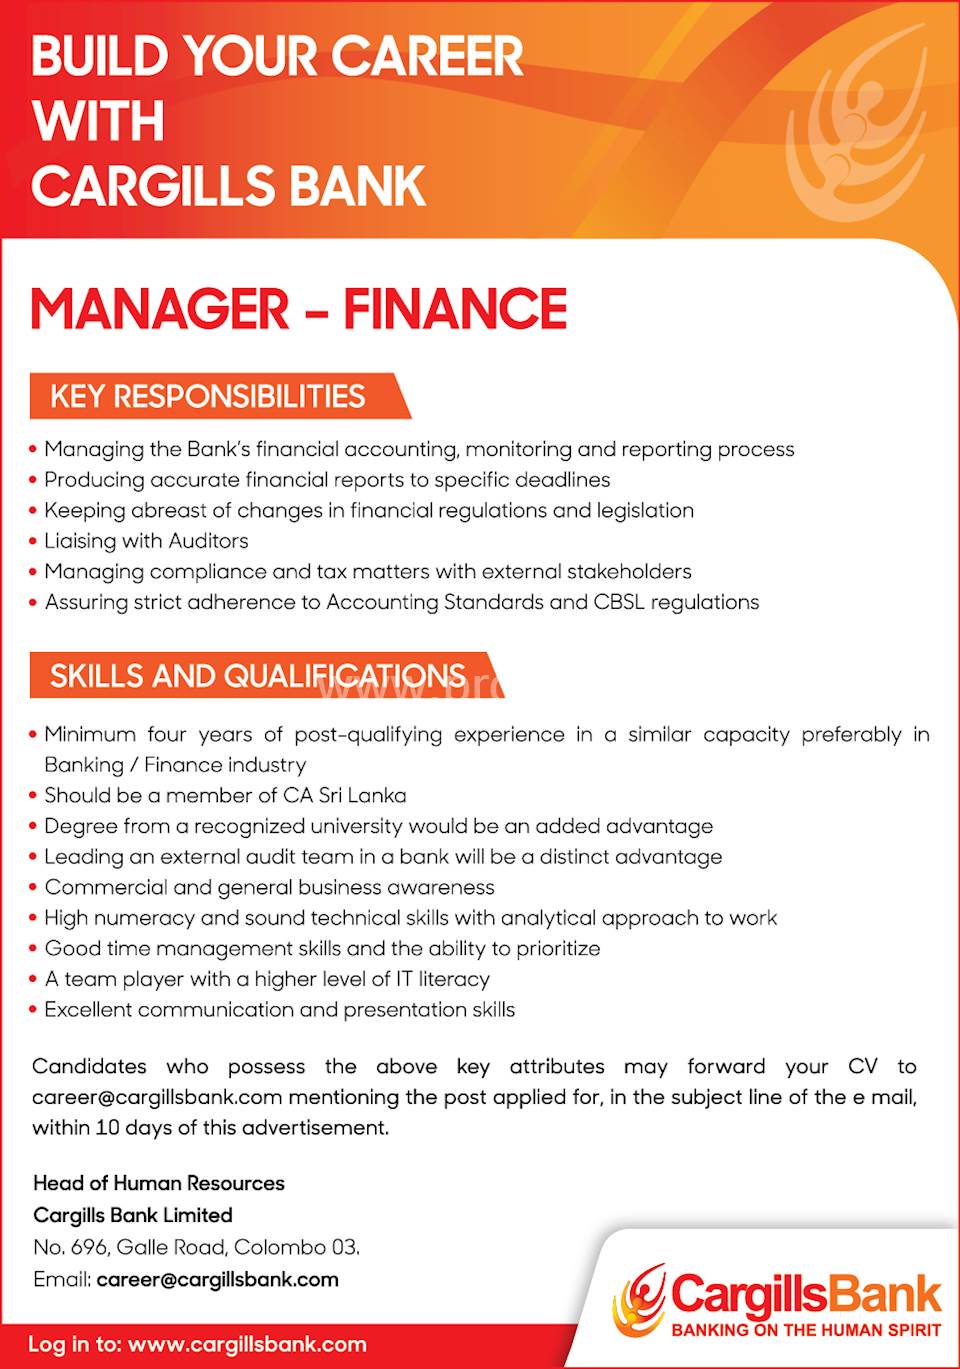 Manager - Finance